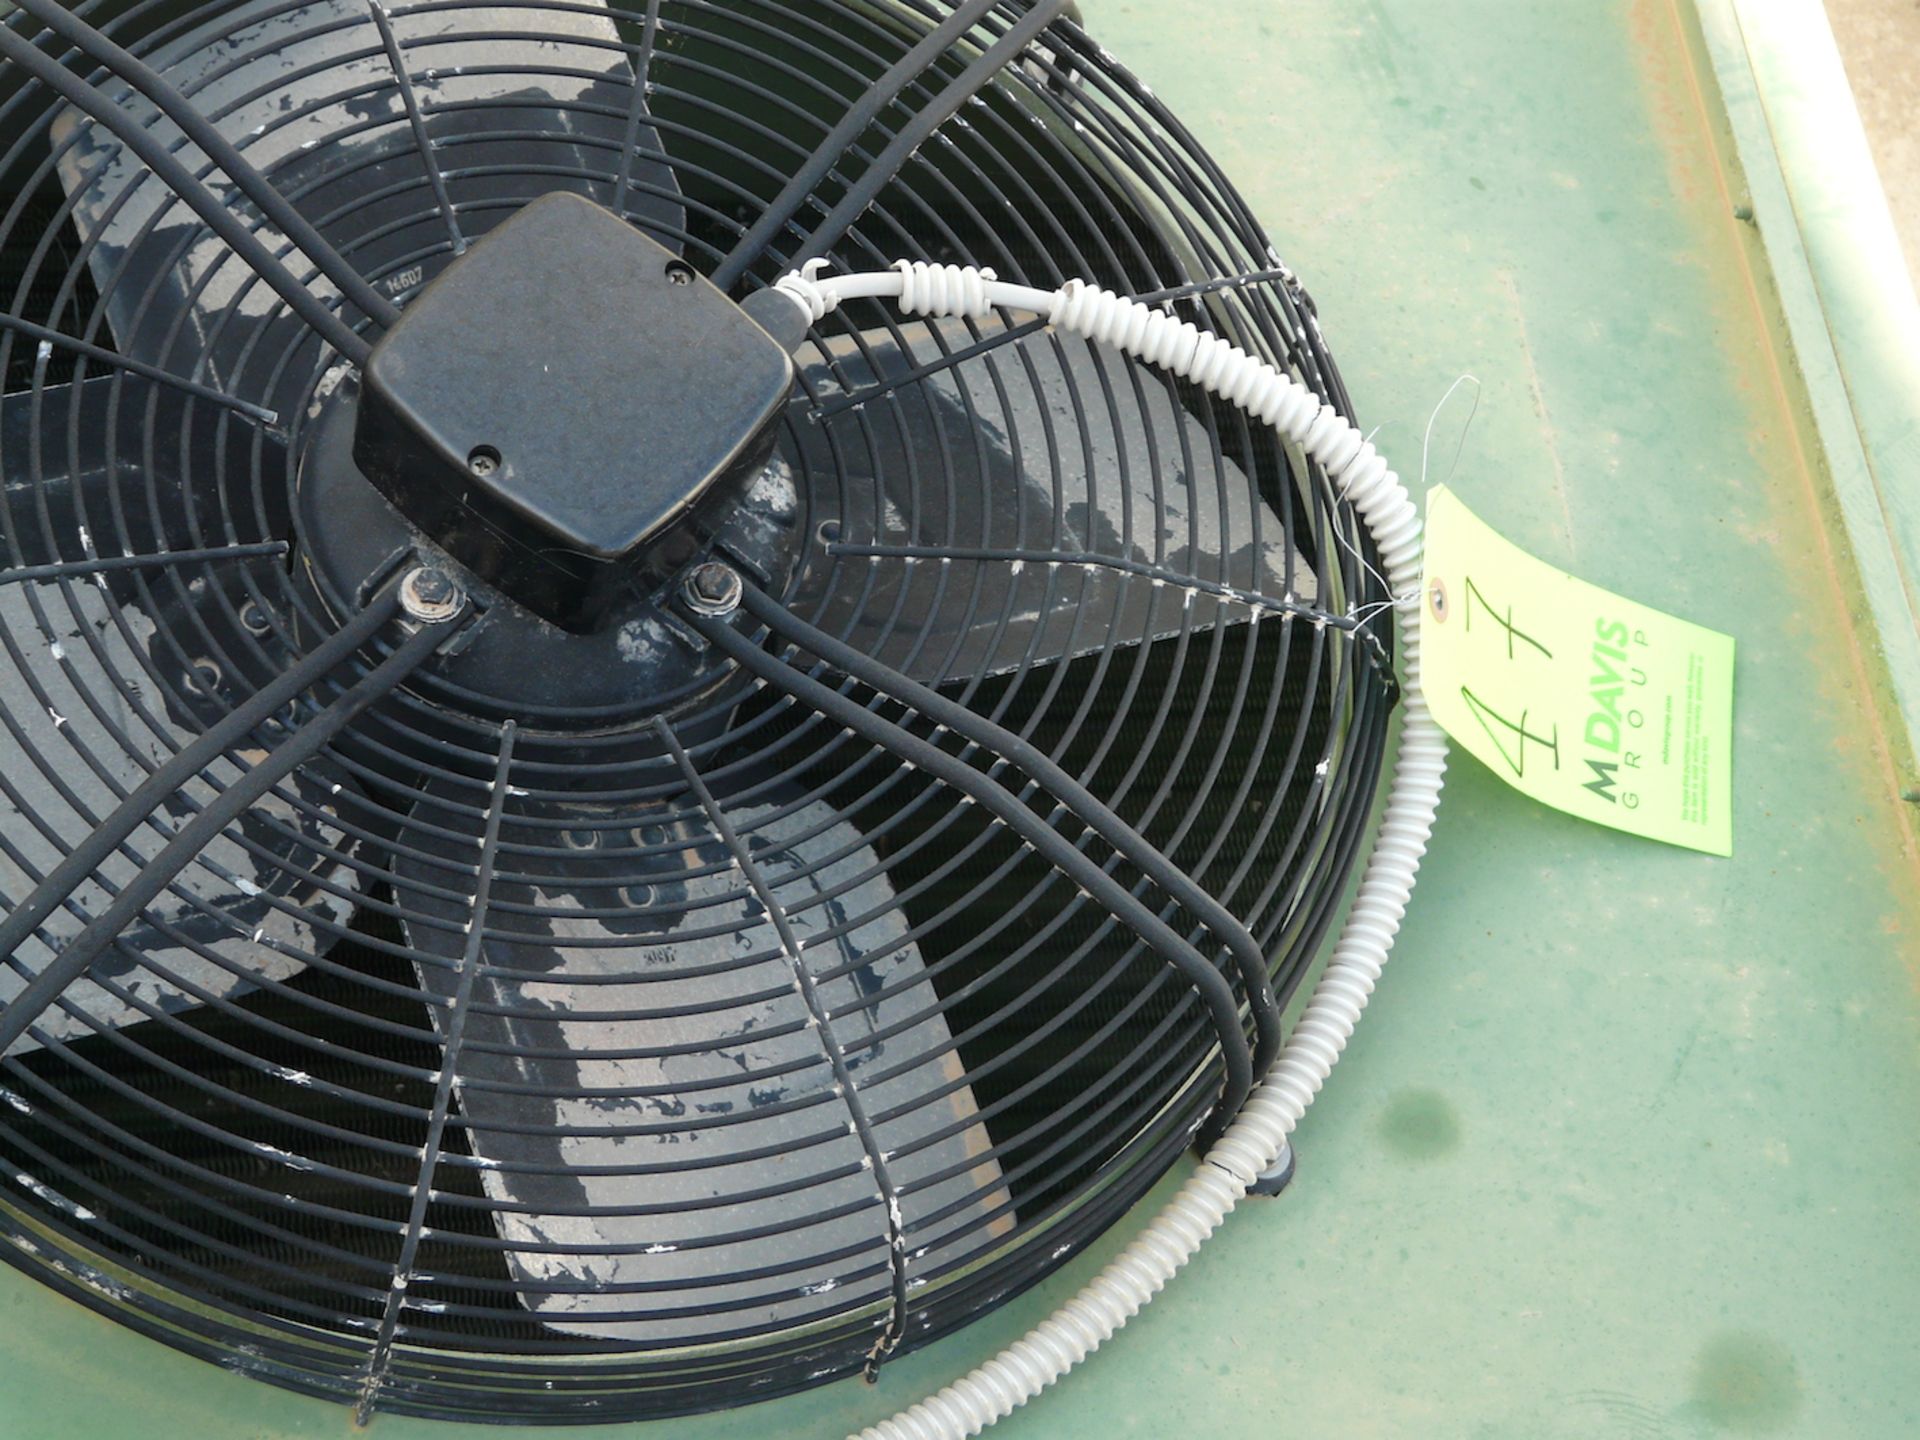 English: Condenser with 4 fans (one is out of order) 180m³ Used for Cold Rooms Greek: Κοντέσερ - Image 9 of 9